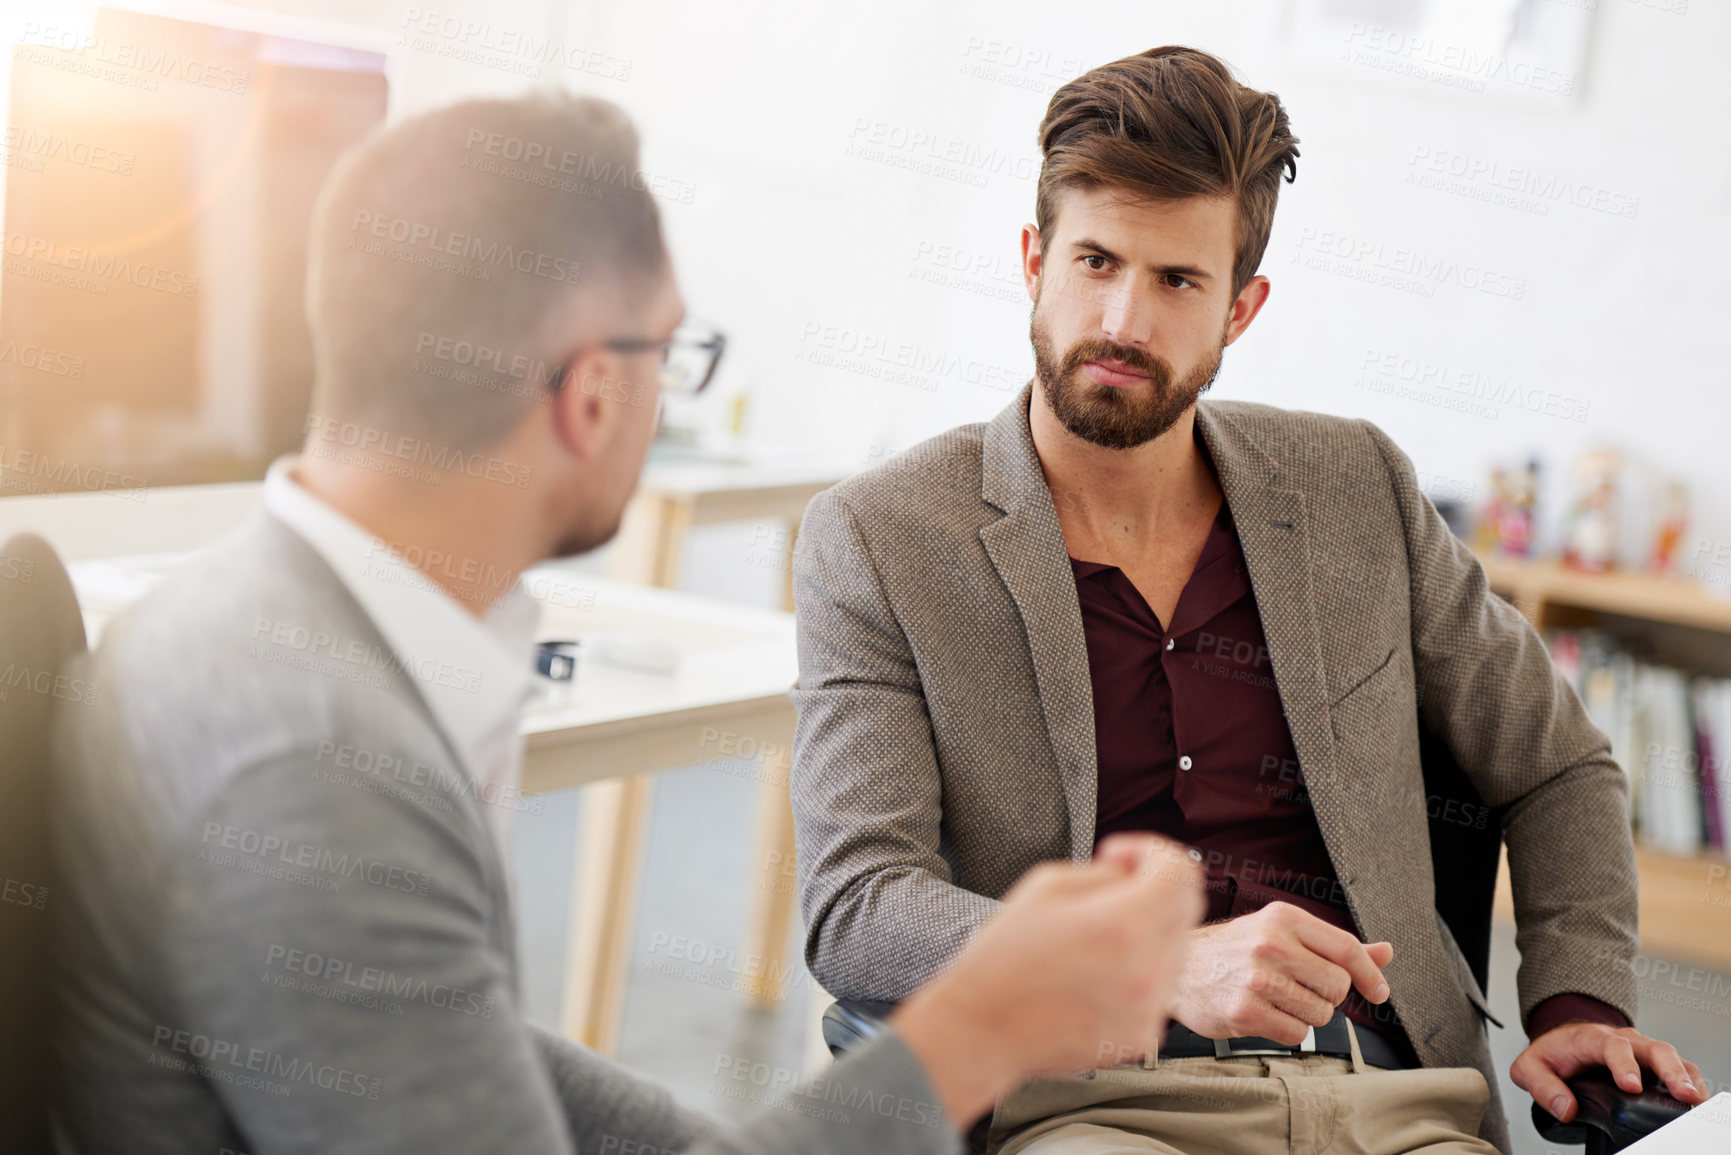 Buy stock photo Cropped shot of two businessmen having a discussion in the office